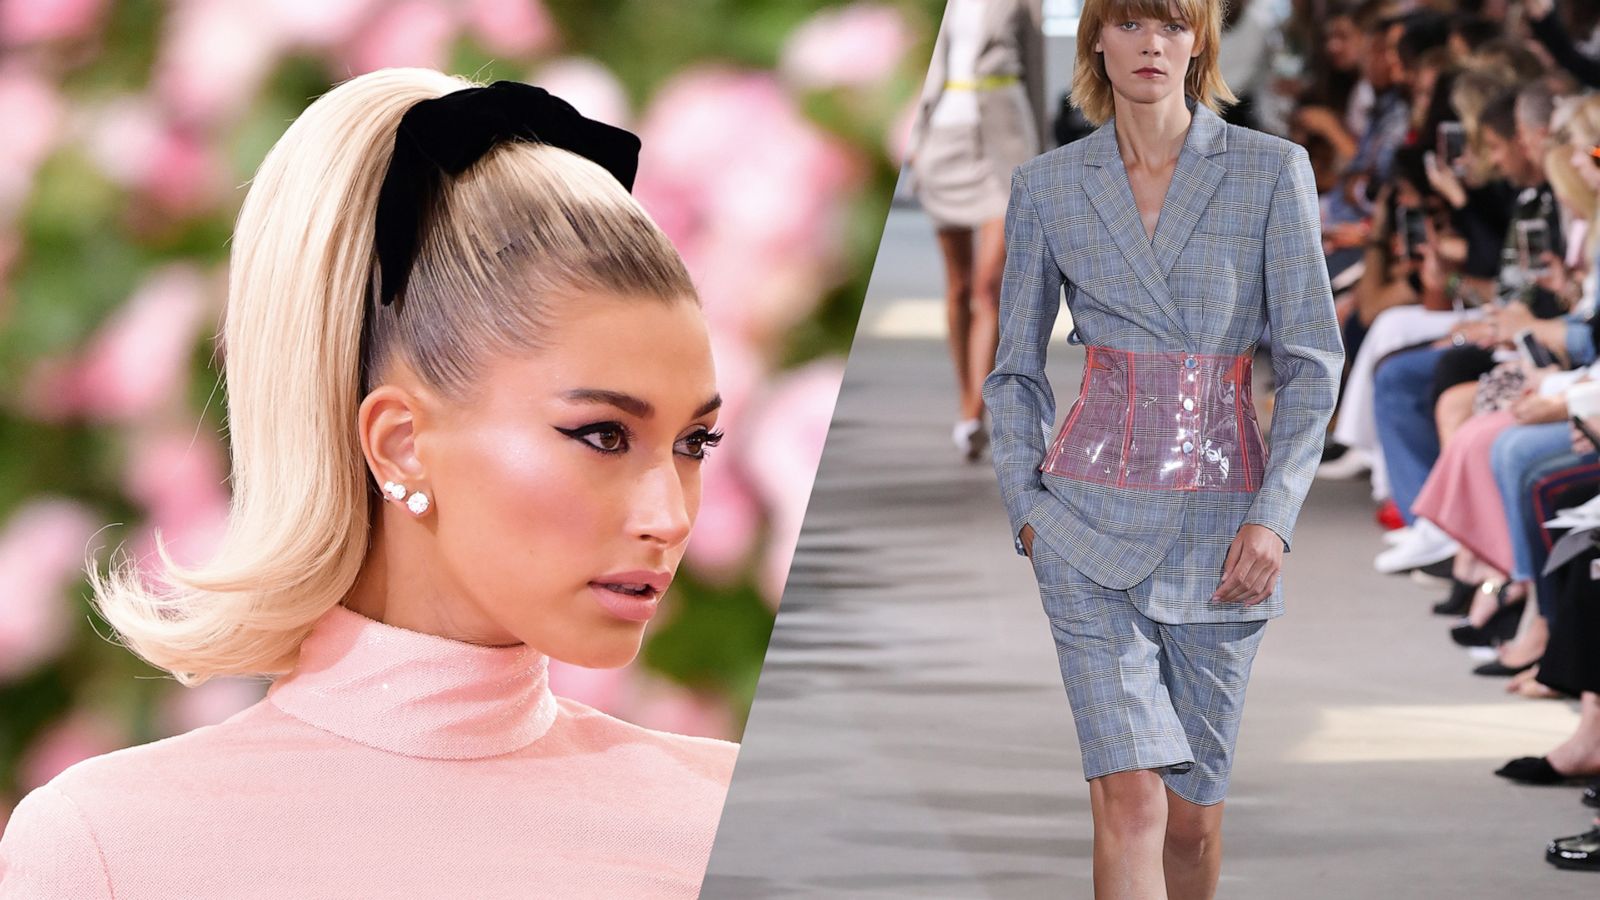 10 fashion and beauty trends to watch for in 2020 - Good Morning